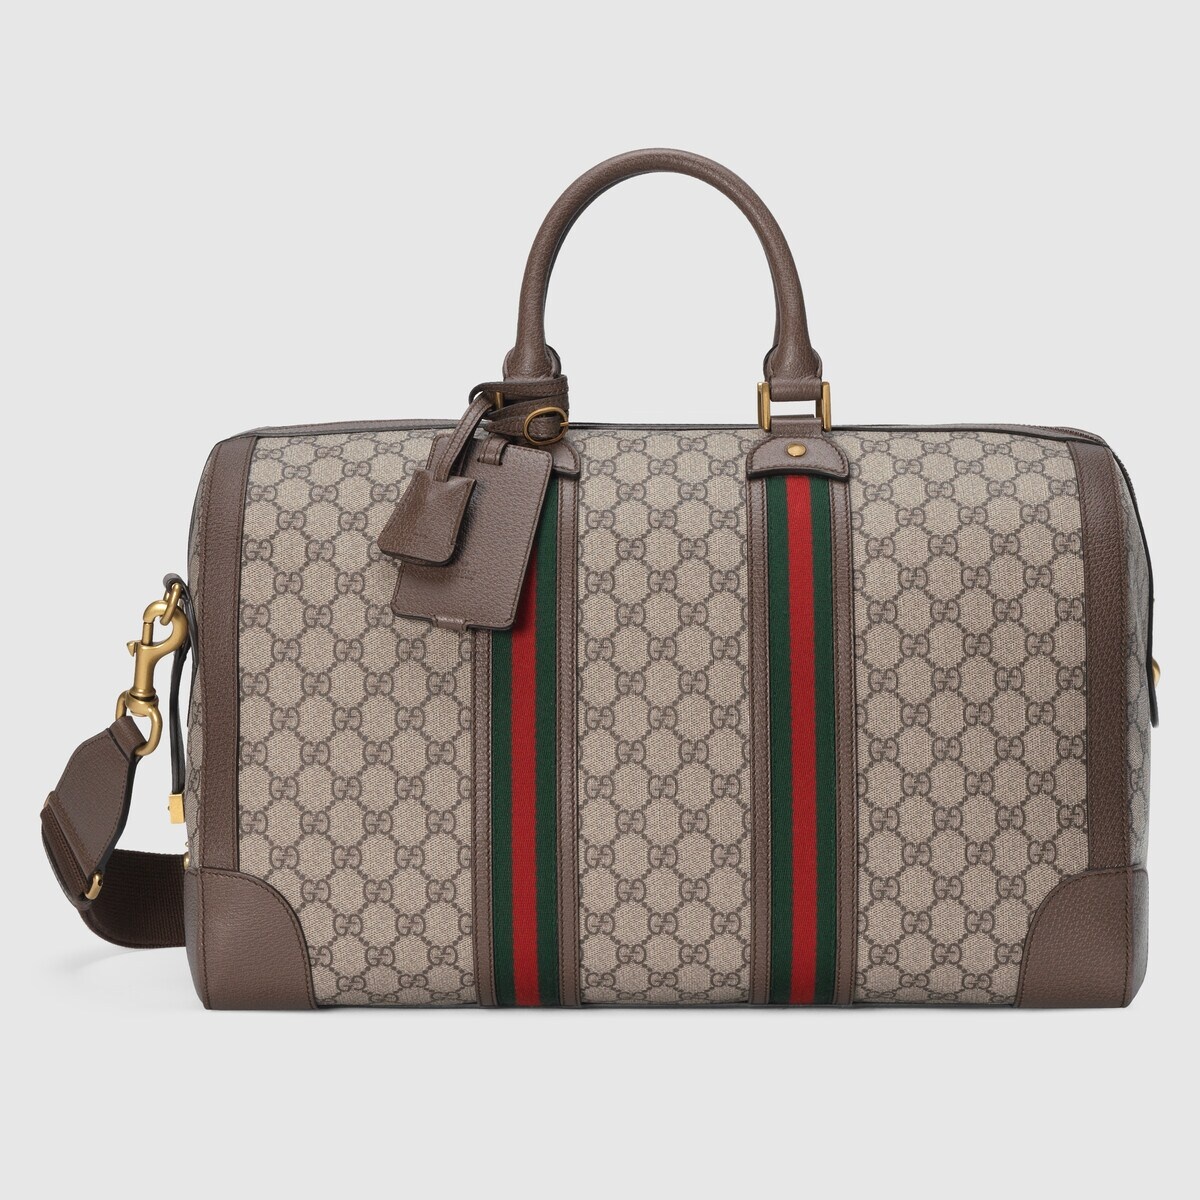 Gucci GG Supreme Web Medium Ophidia Carry-On Duffle Bag w/Tags